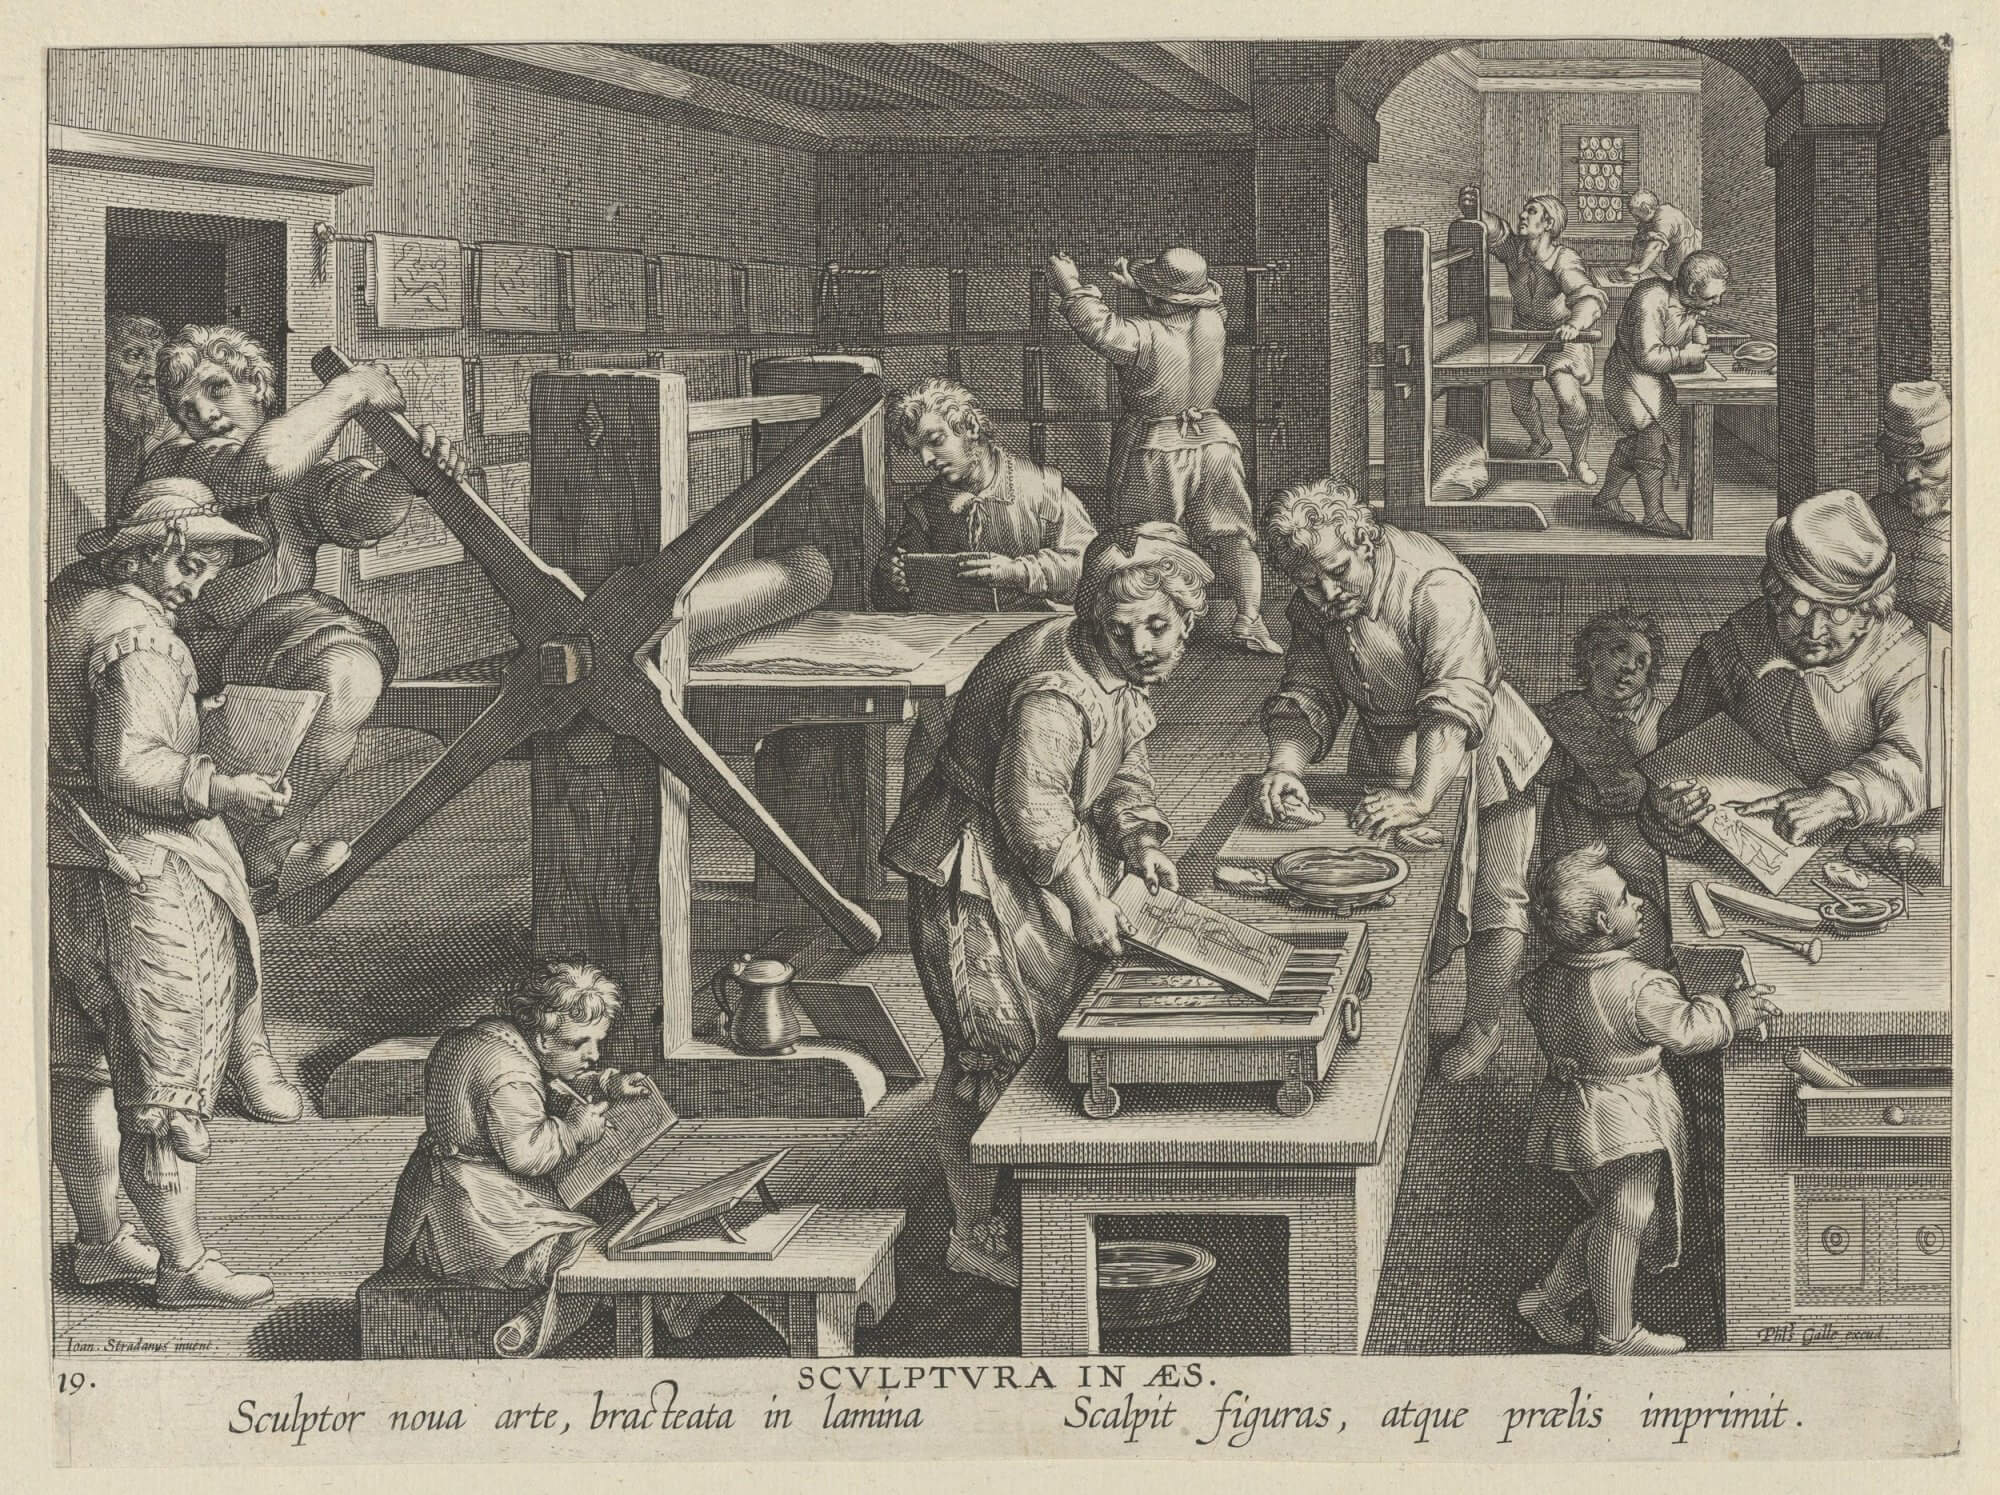 In this depiction of copper engraving, you can see the full range of activities involved in printing an engraving. In the background a sheet of copper is being flattened and prepared for engraving; in the lower right, boys are being taught how to use a burin to draw on a plate; in the middle men are inking and preparing a plate for printing; on the left, a man is turning the wheel of a rolling press to print a plate; and in the background, finished prints are being hung to dry.